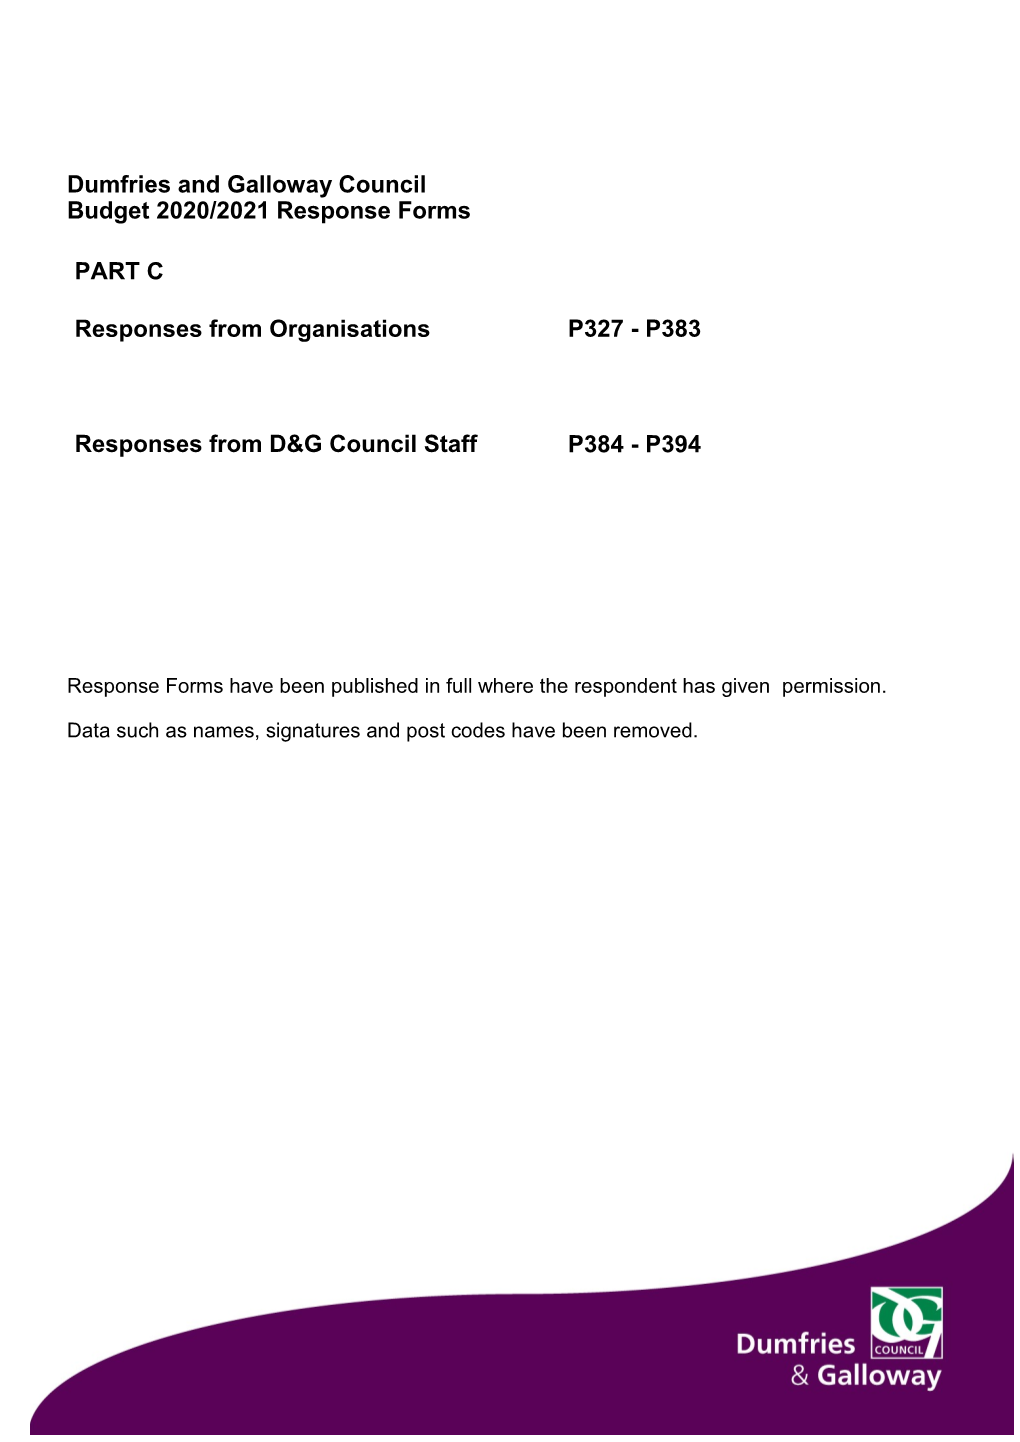 Dumfries and Galloway Council Budget 2020/2021 Response Forms